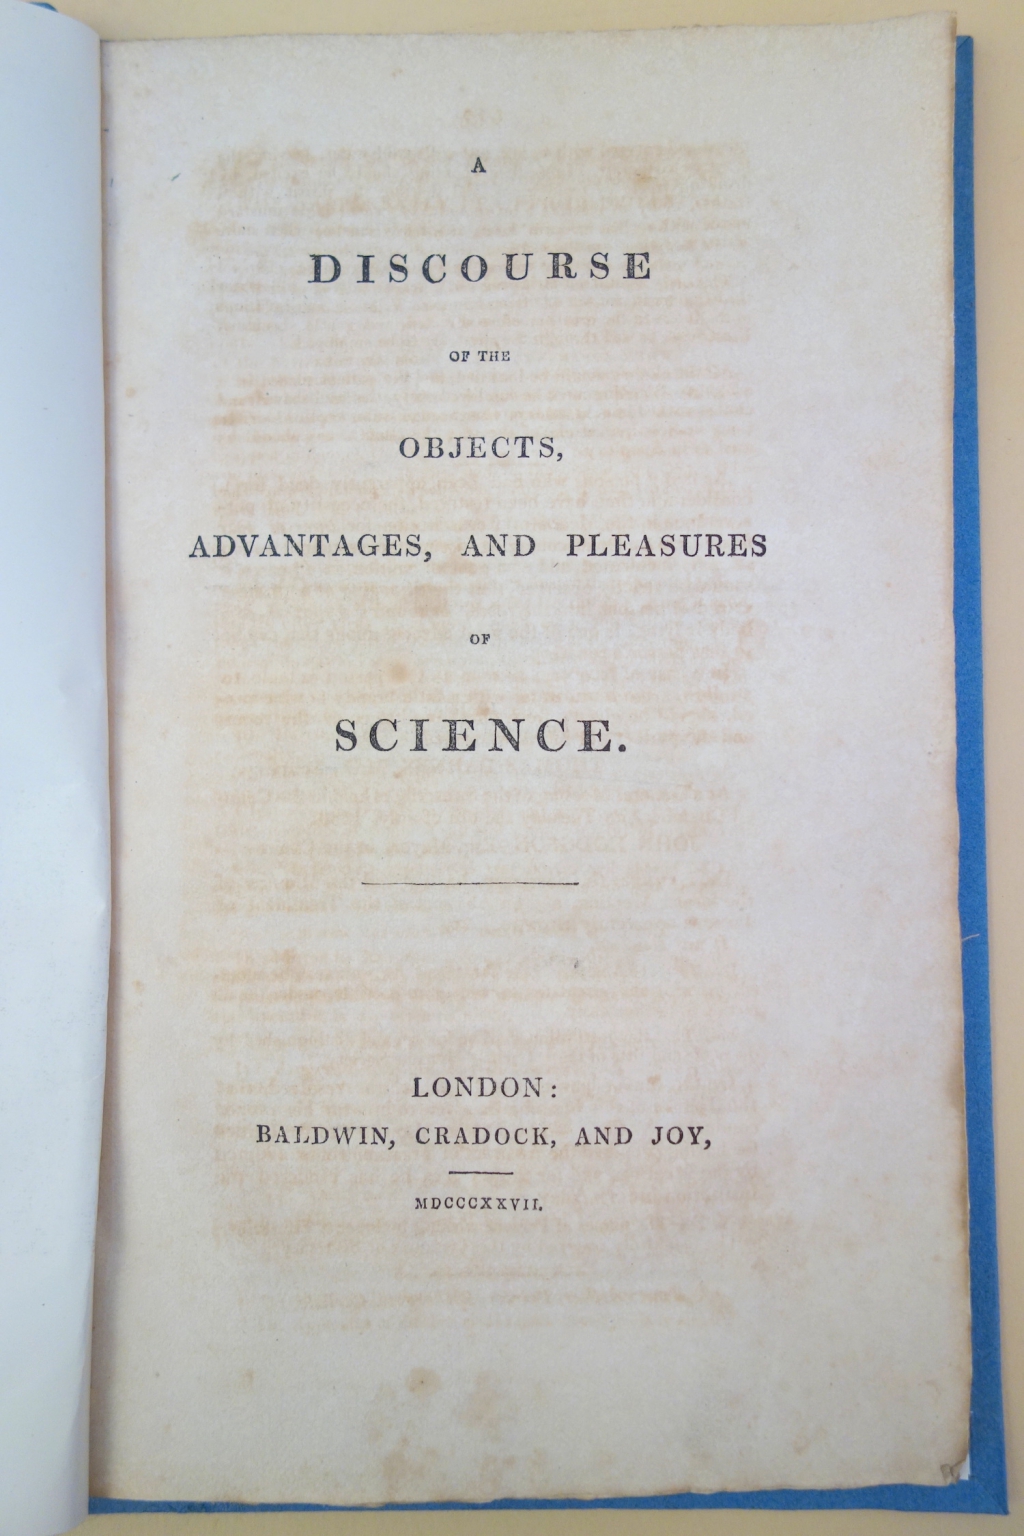 Brougham Discourse 1827 title page